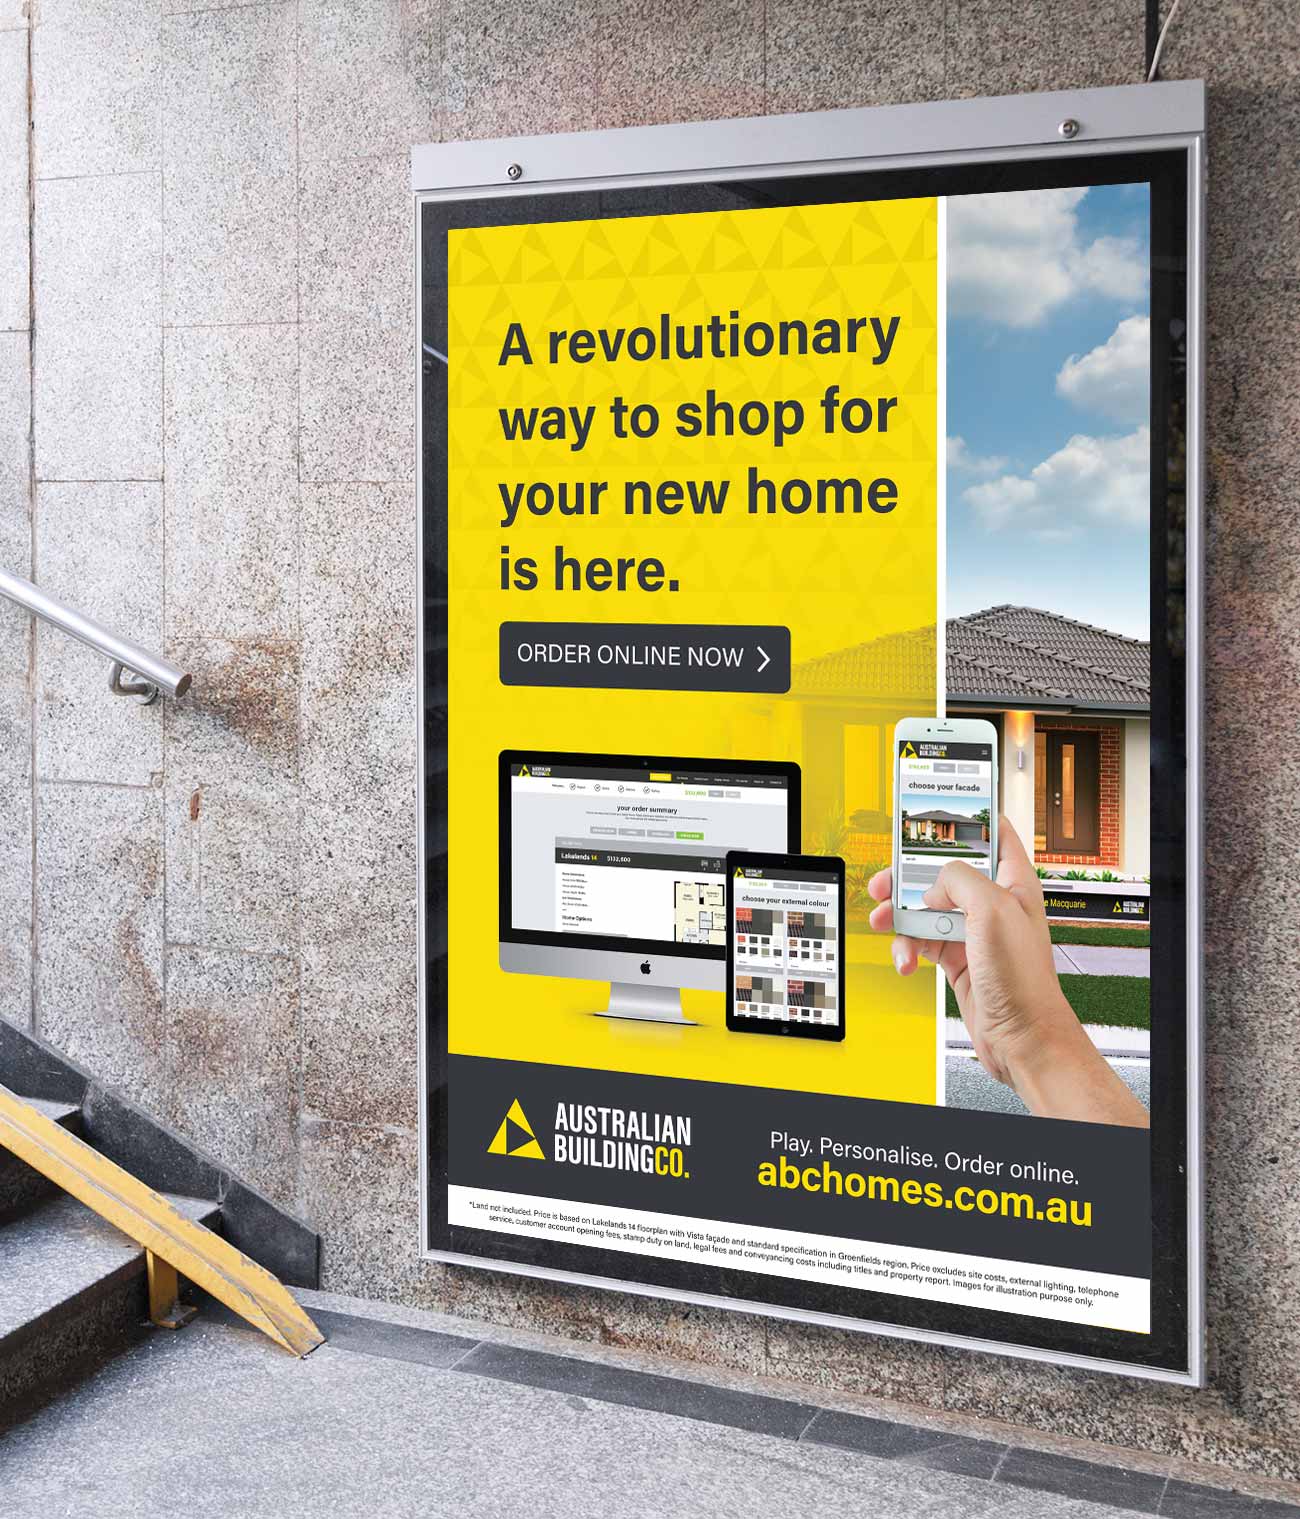 Australian Building Company - Home Creator. A revolutionary way to shop for your new home. Poster design.